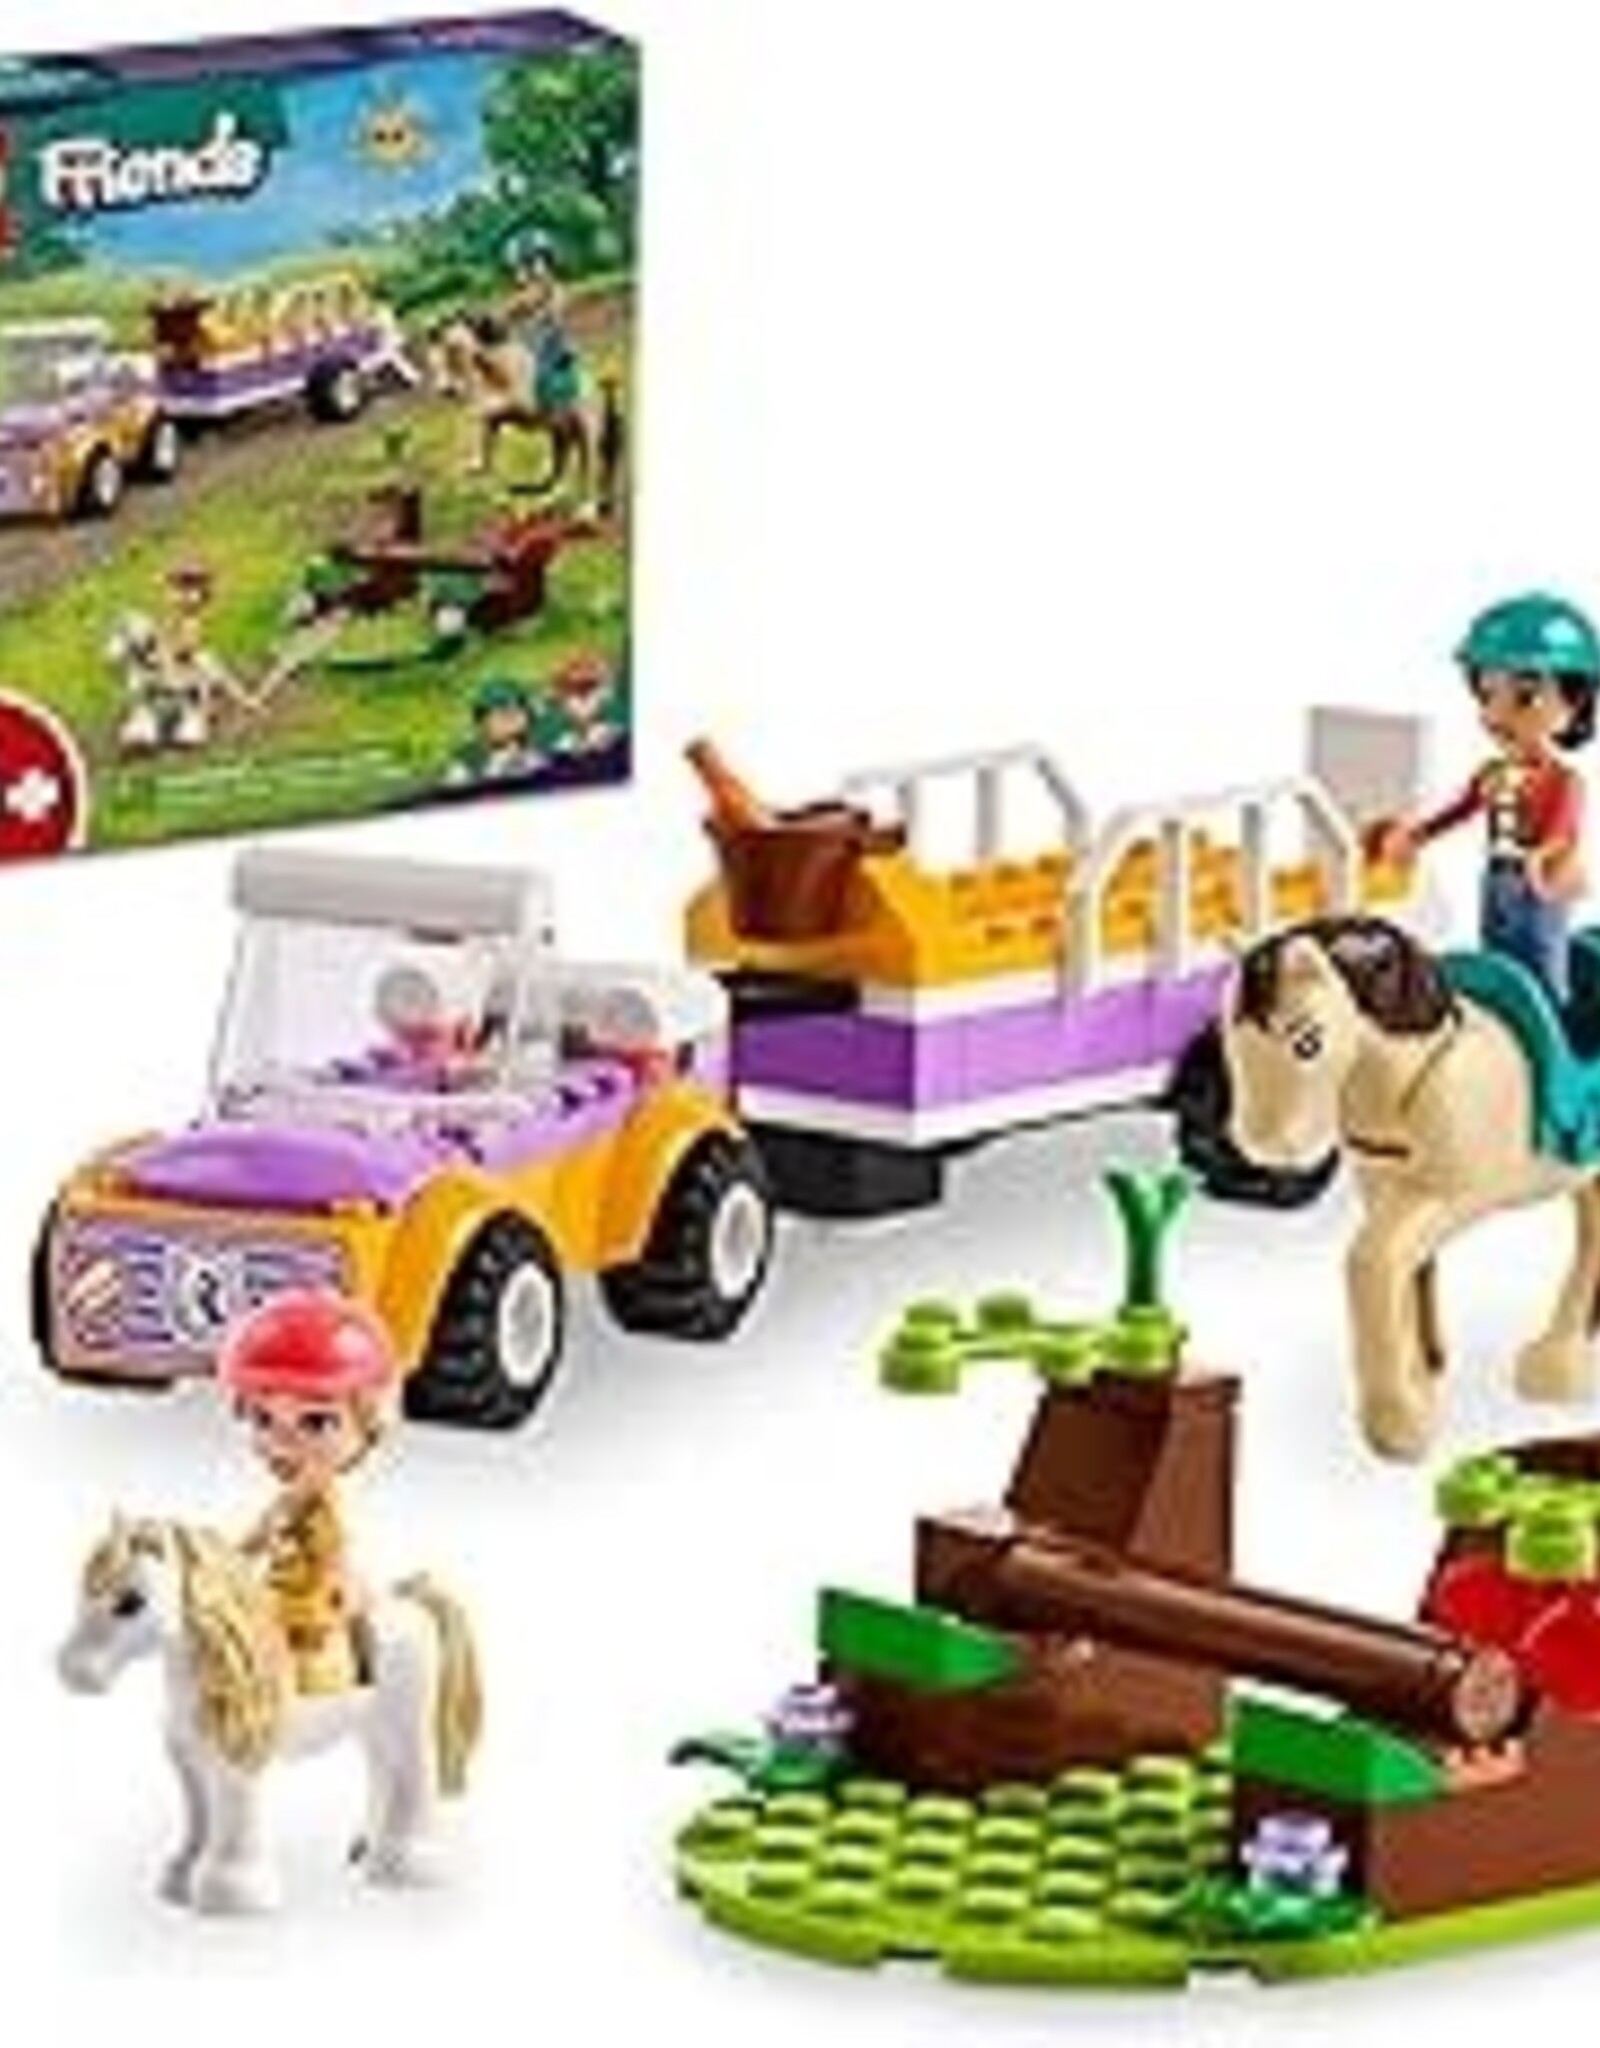 LEGO Friends Horse and Pony Trailer